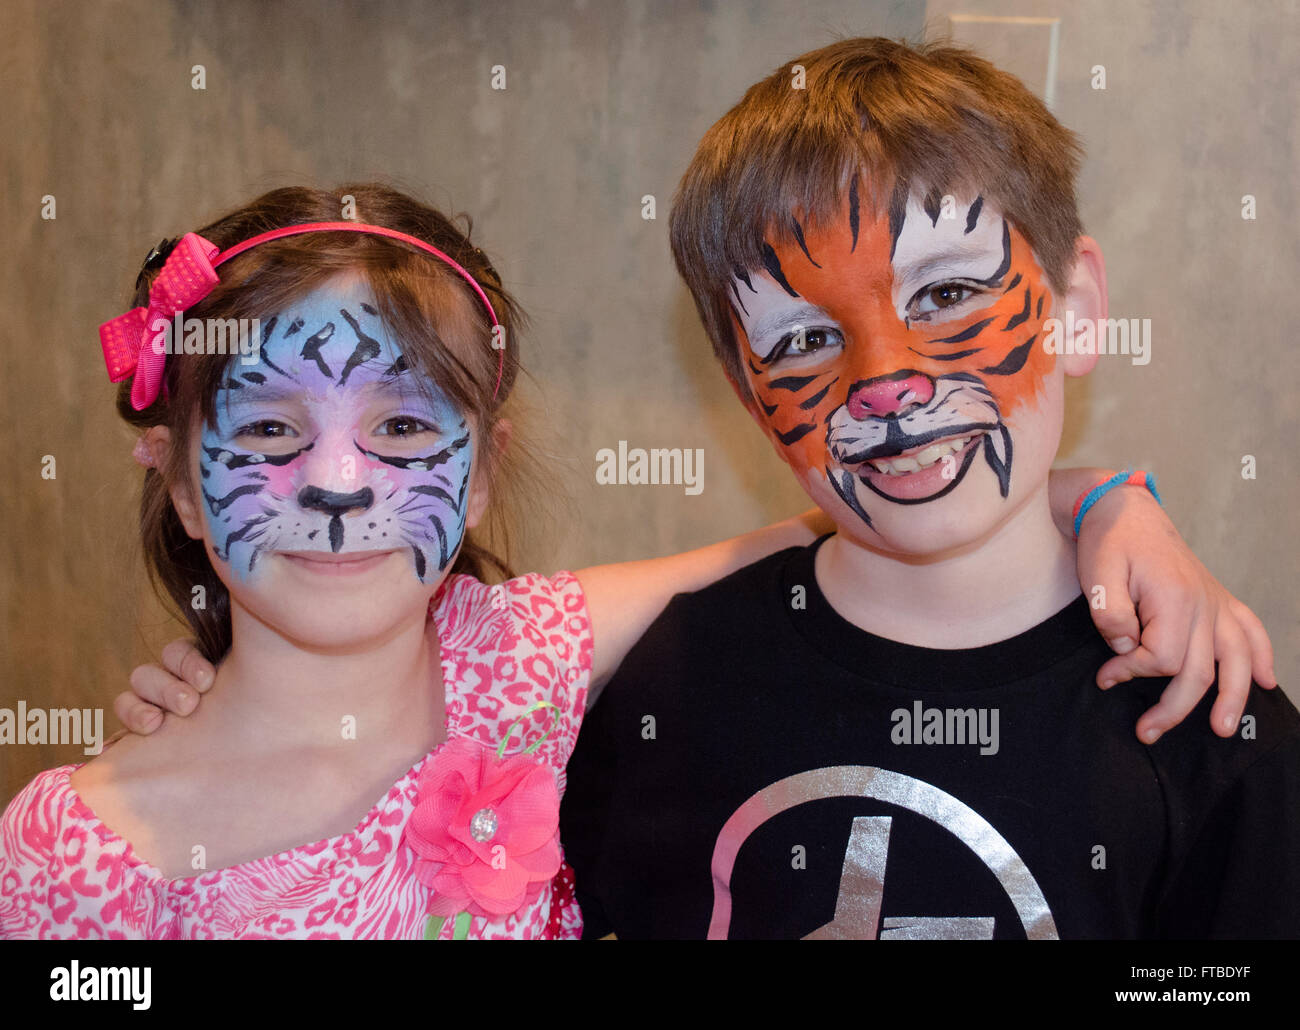 Boy and girl wearing animal face paint from party Stock Photo - Alamy